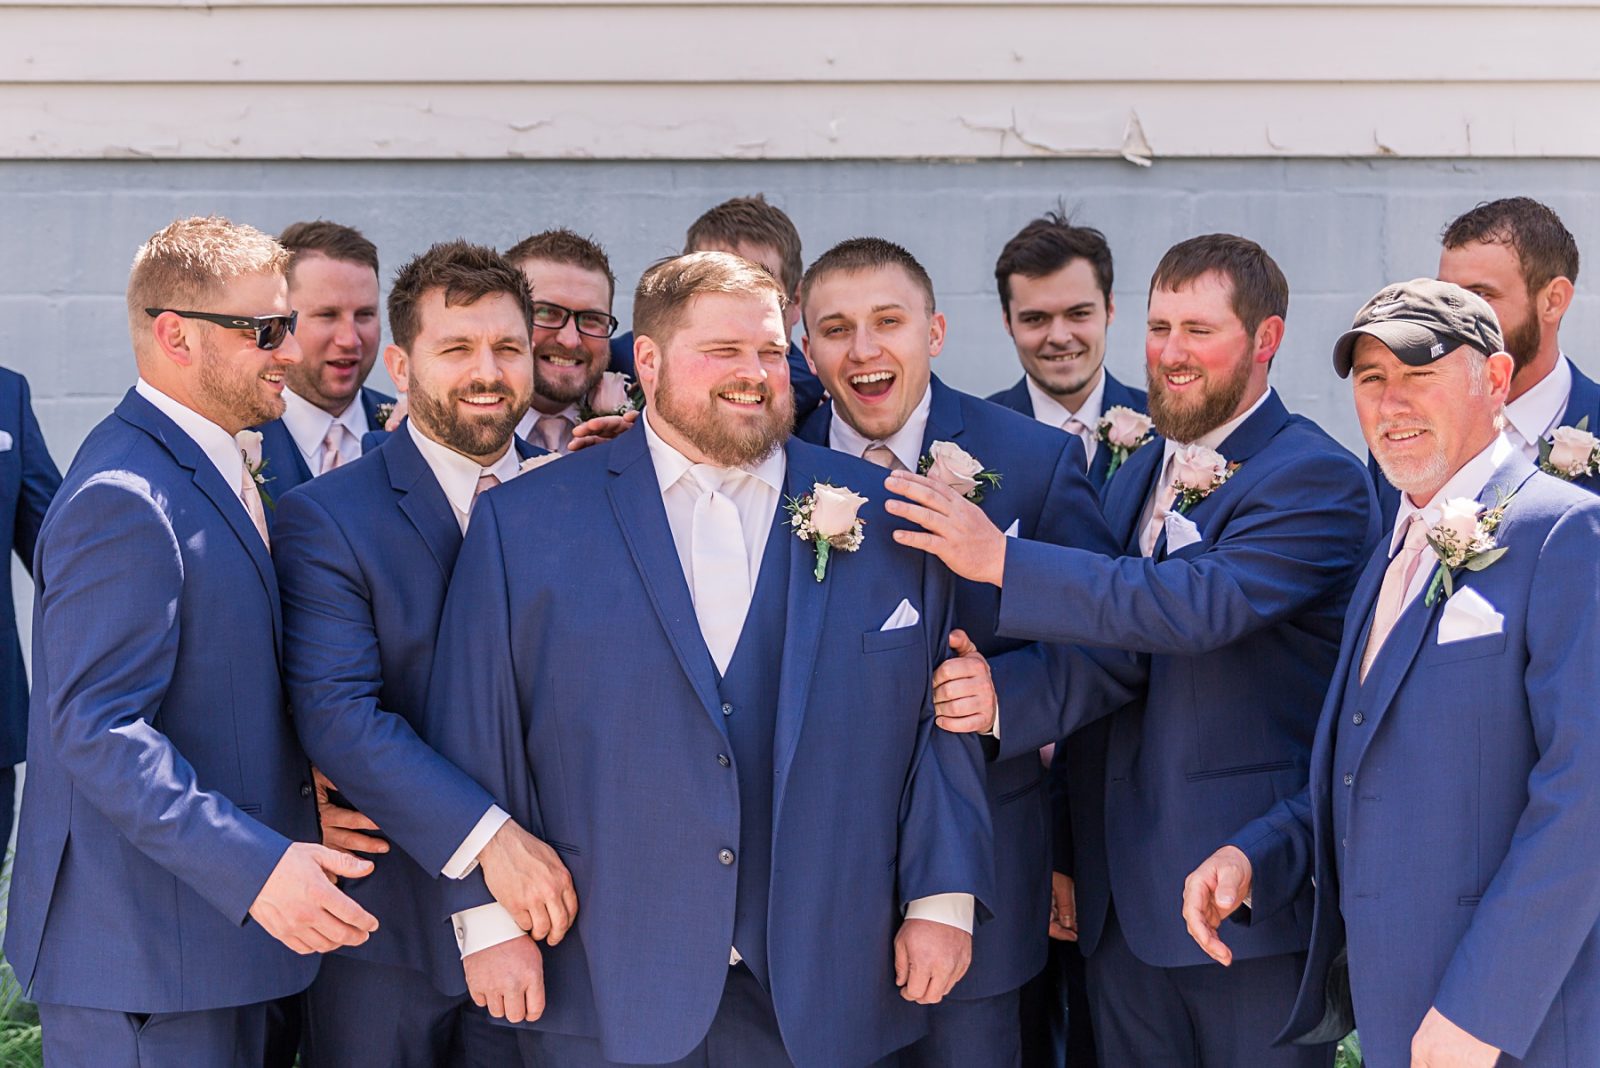 Wedding photography by Diana Gramlich, Groom and Groomsmen in navy blue suits laughing